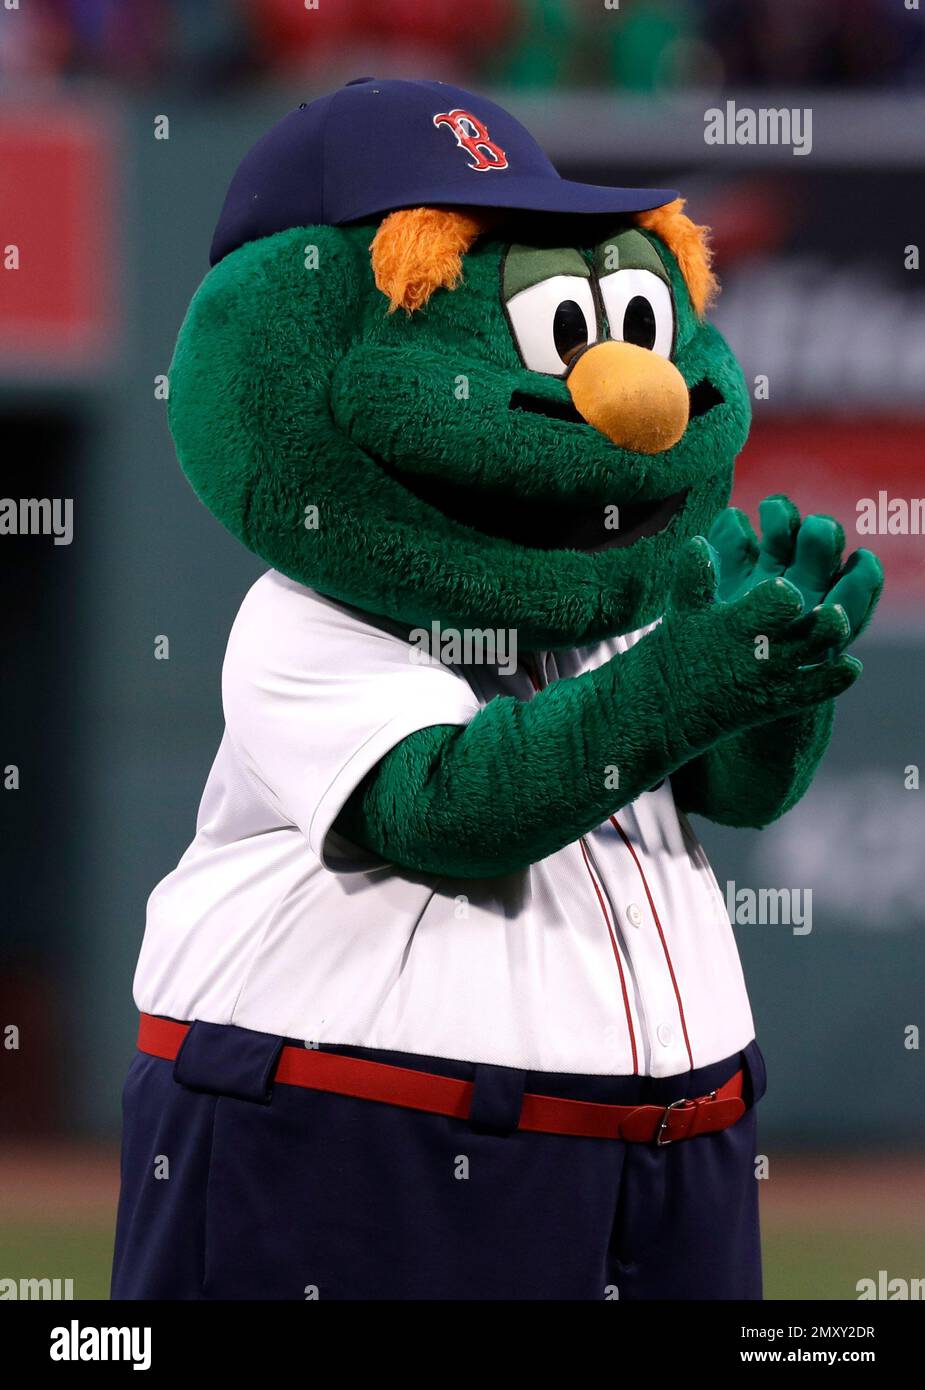 PHOTO GALLERY/Wally the Green Monster comes to Cohasset!